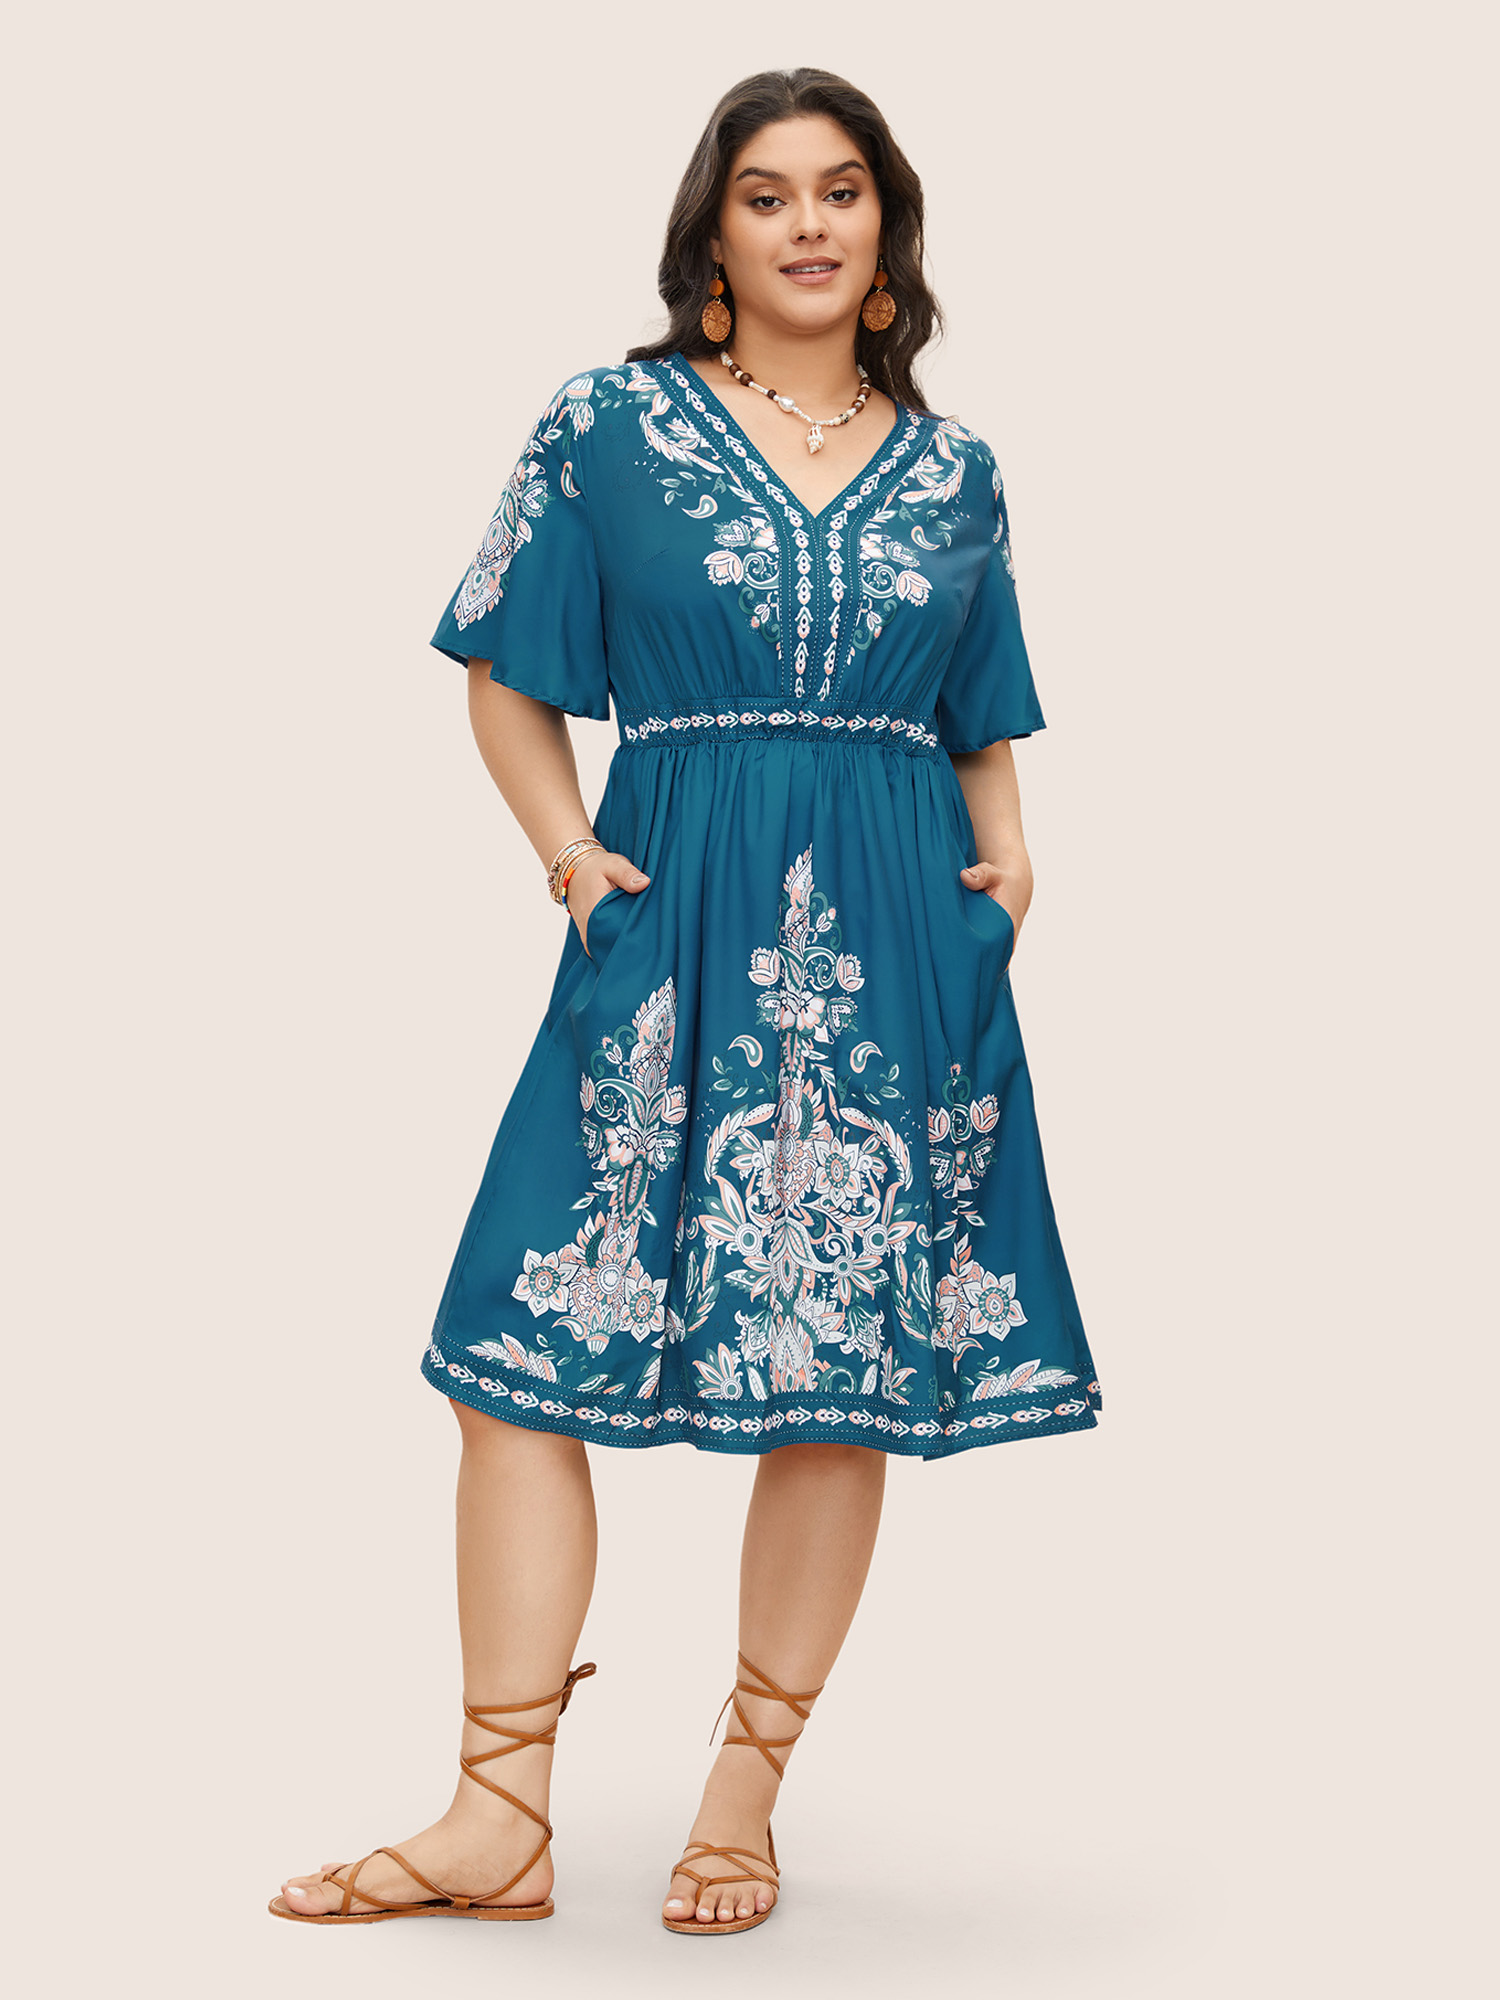 

Vintage Embroidered Floral Print Plus Size Vacation Dress Women Bohemian Emerald Pocket Ruffle Sleeve Short Sleeve V Neck Pocket Casual Knee Dress BloomChic, Aegean